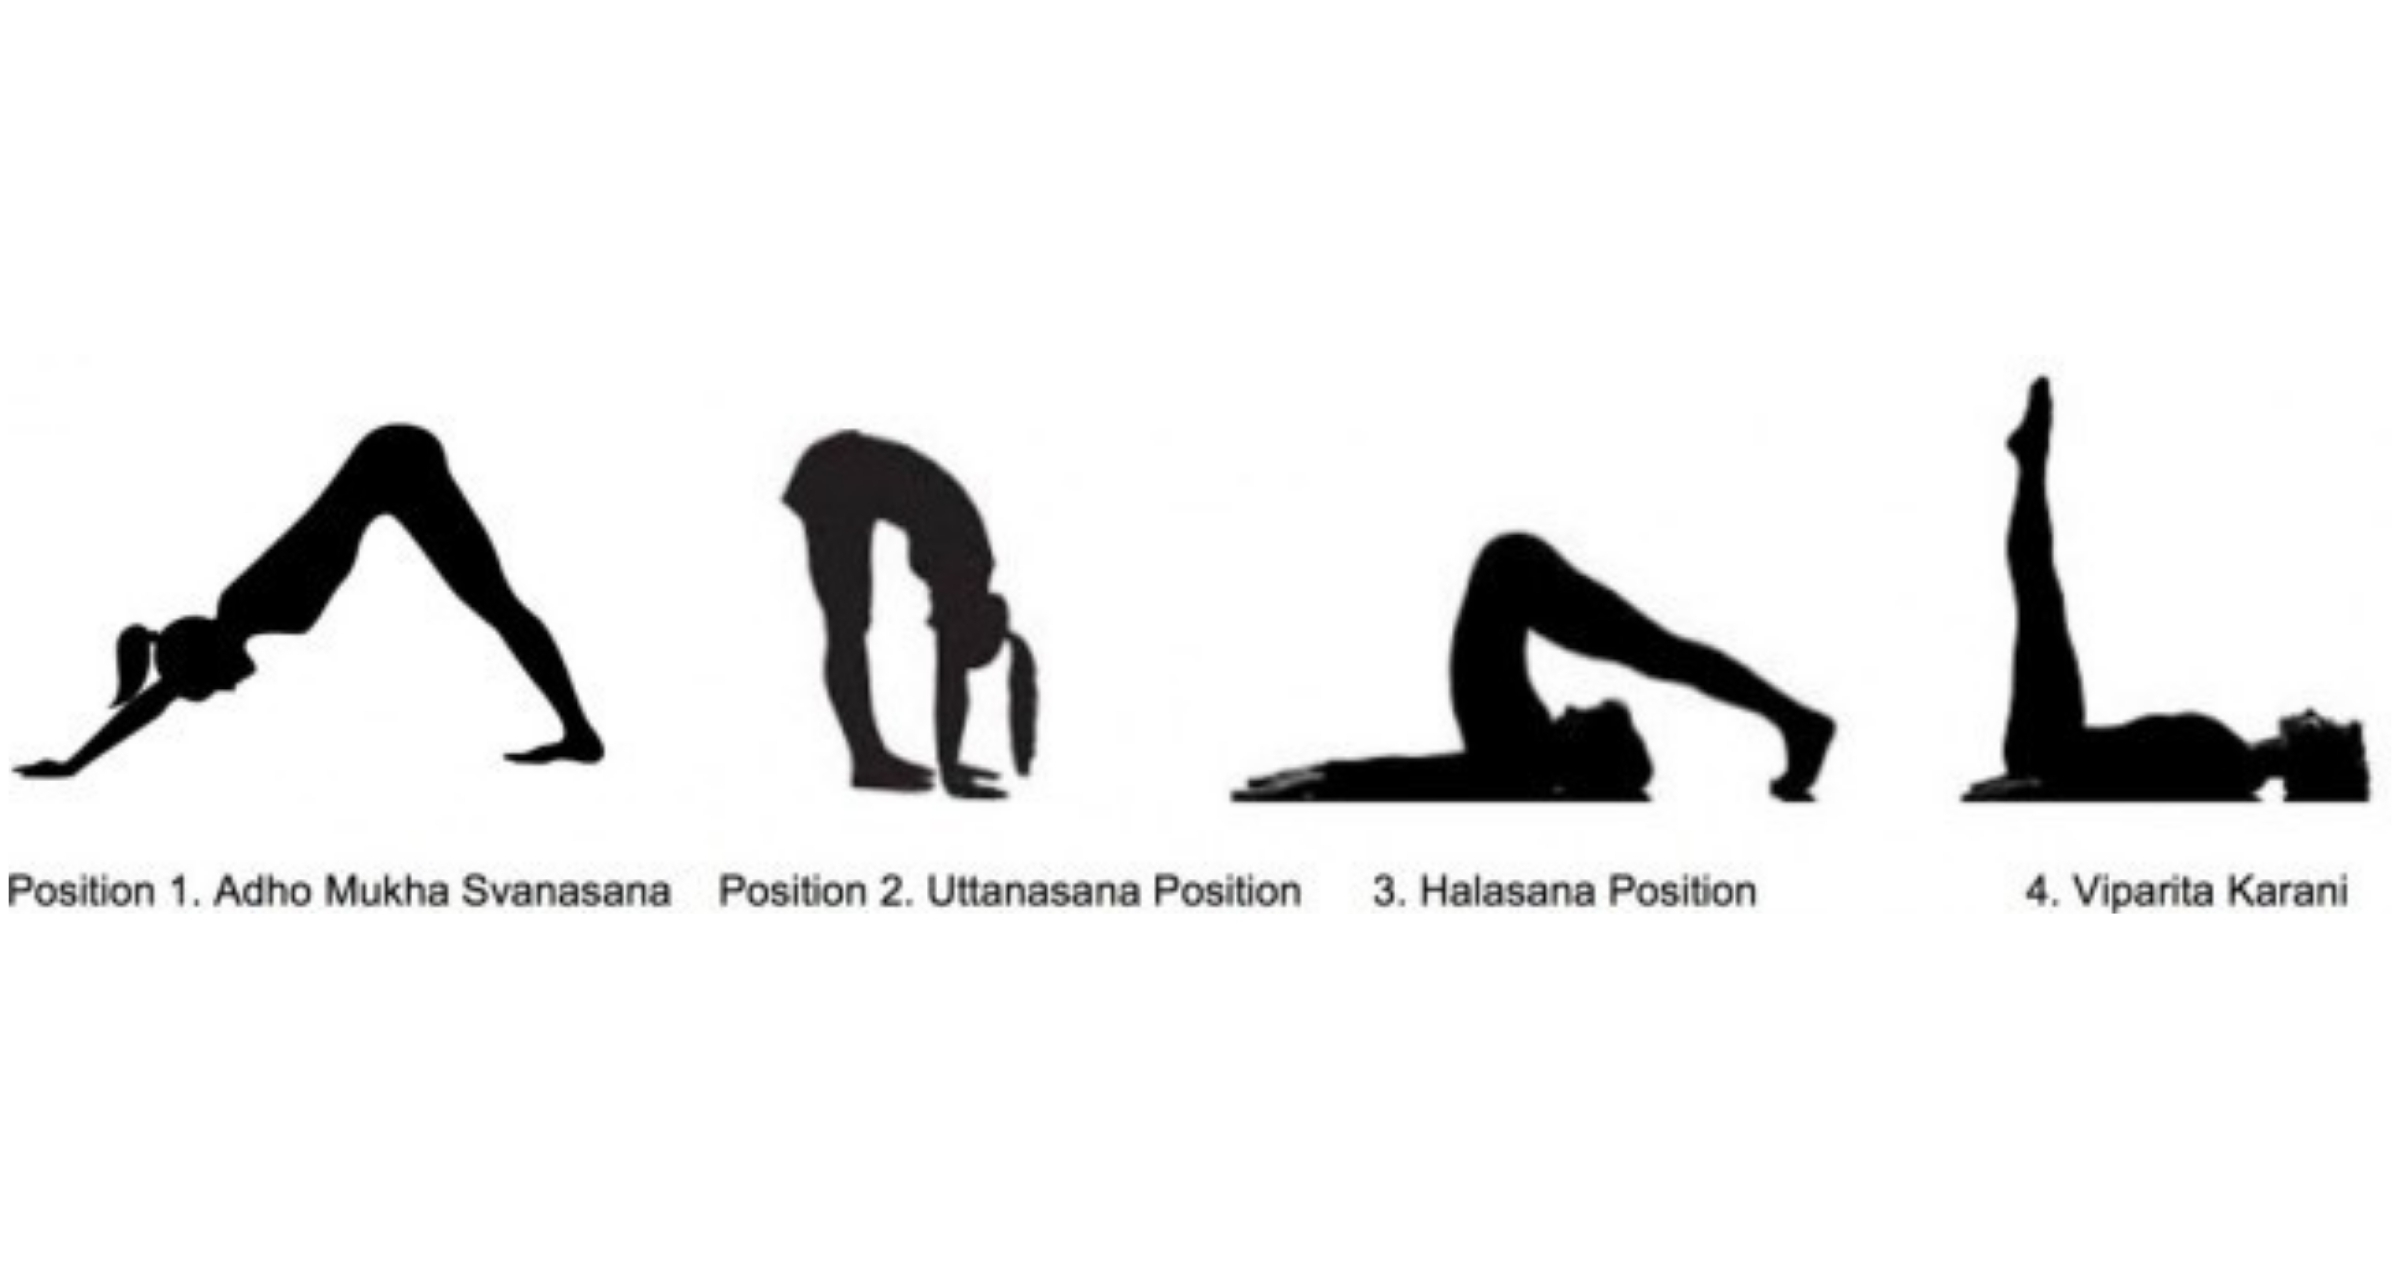 Diagrams of 4 unsuitable yoga positions for those with glaucoma